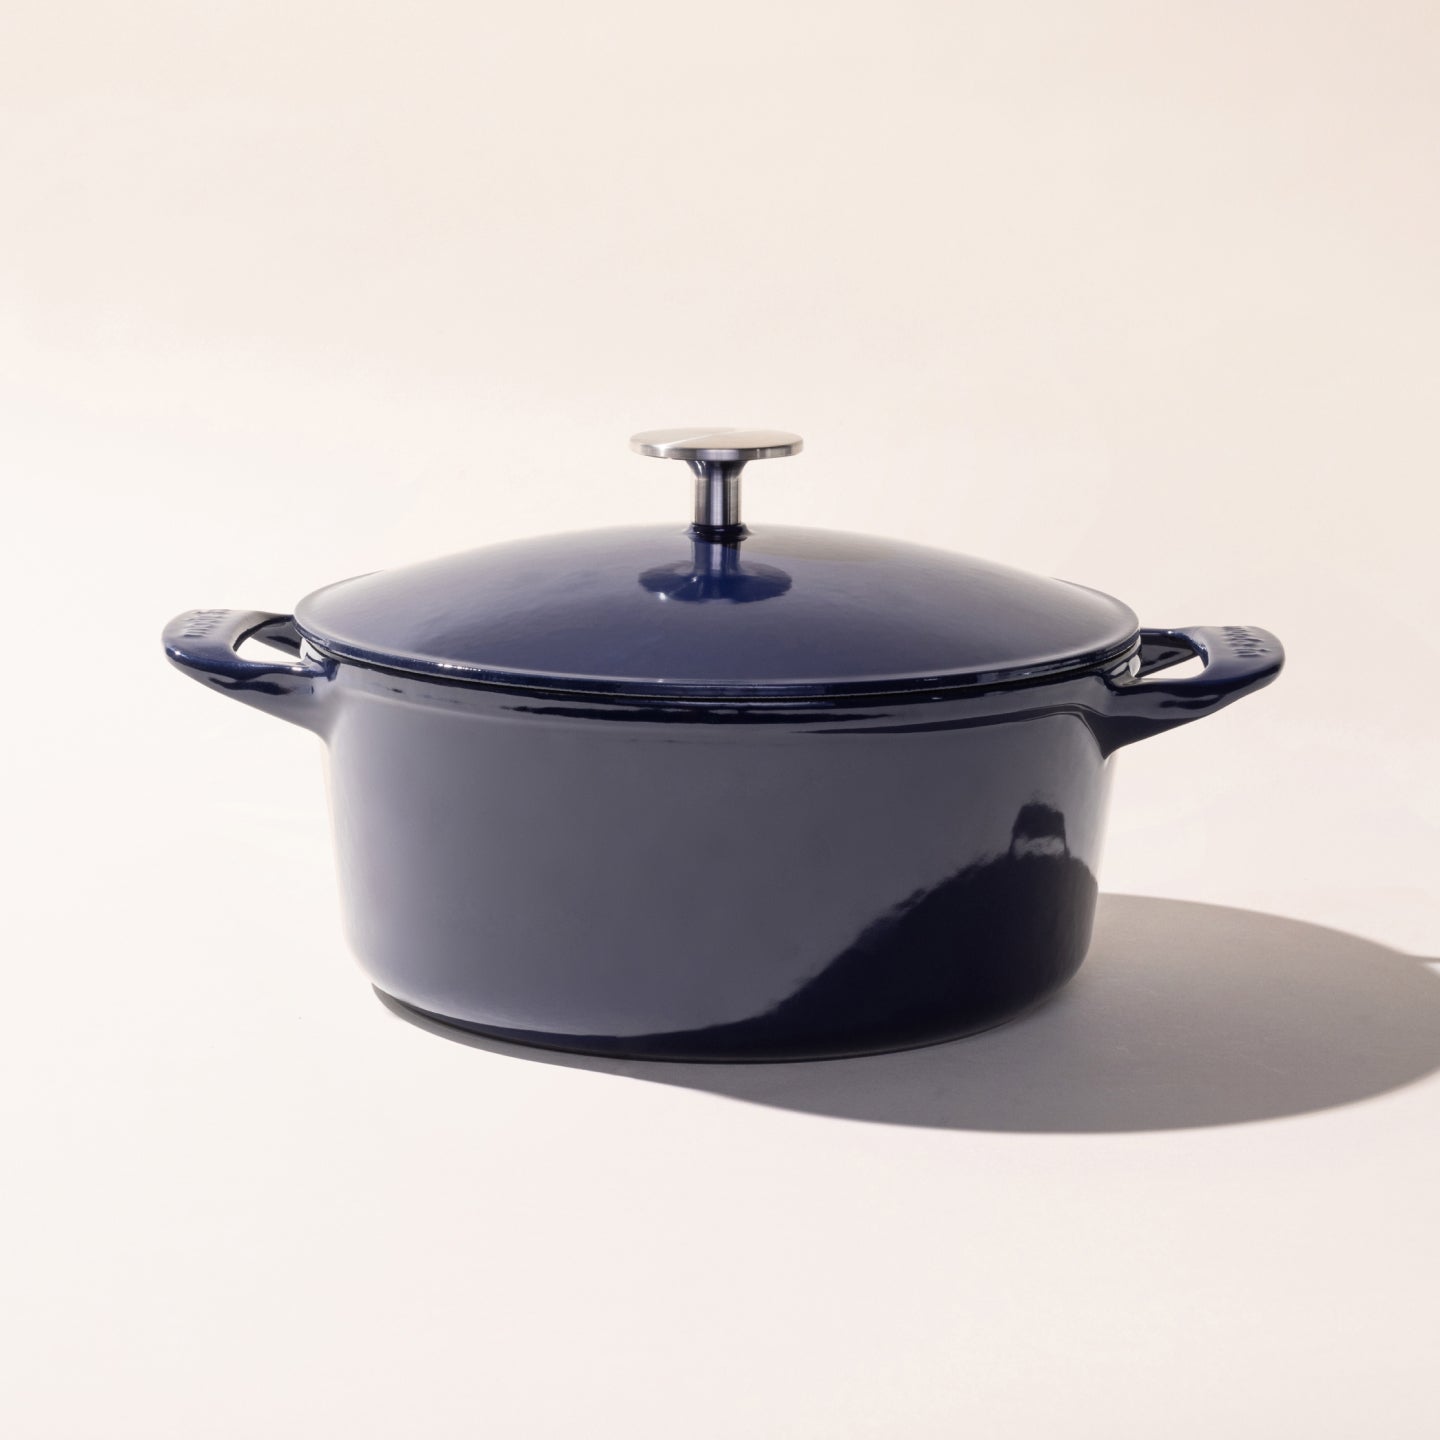 Enameled Cast Iron - Made In